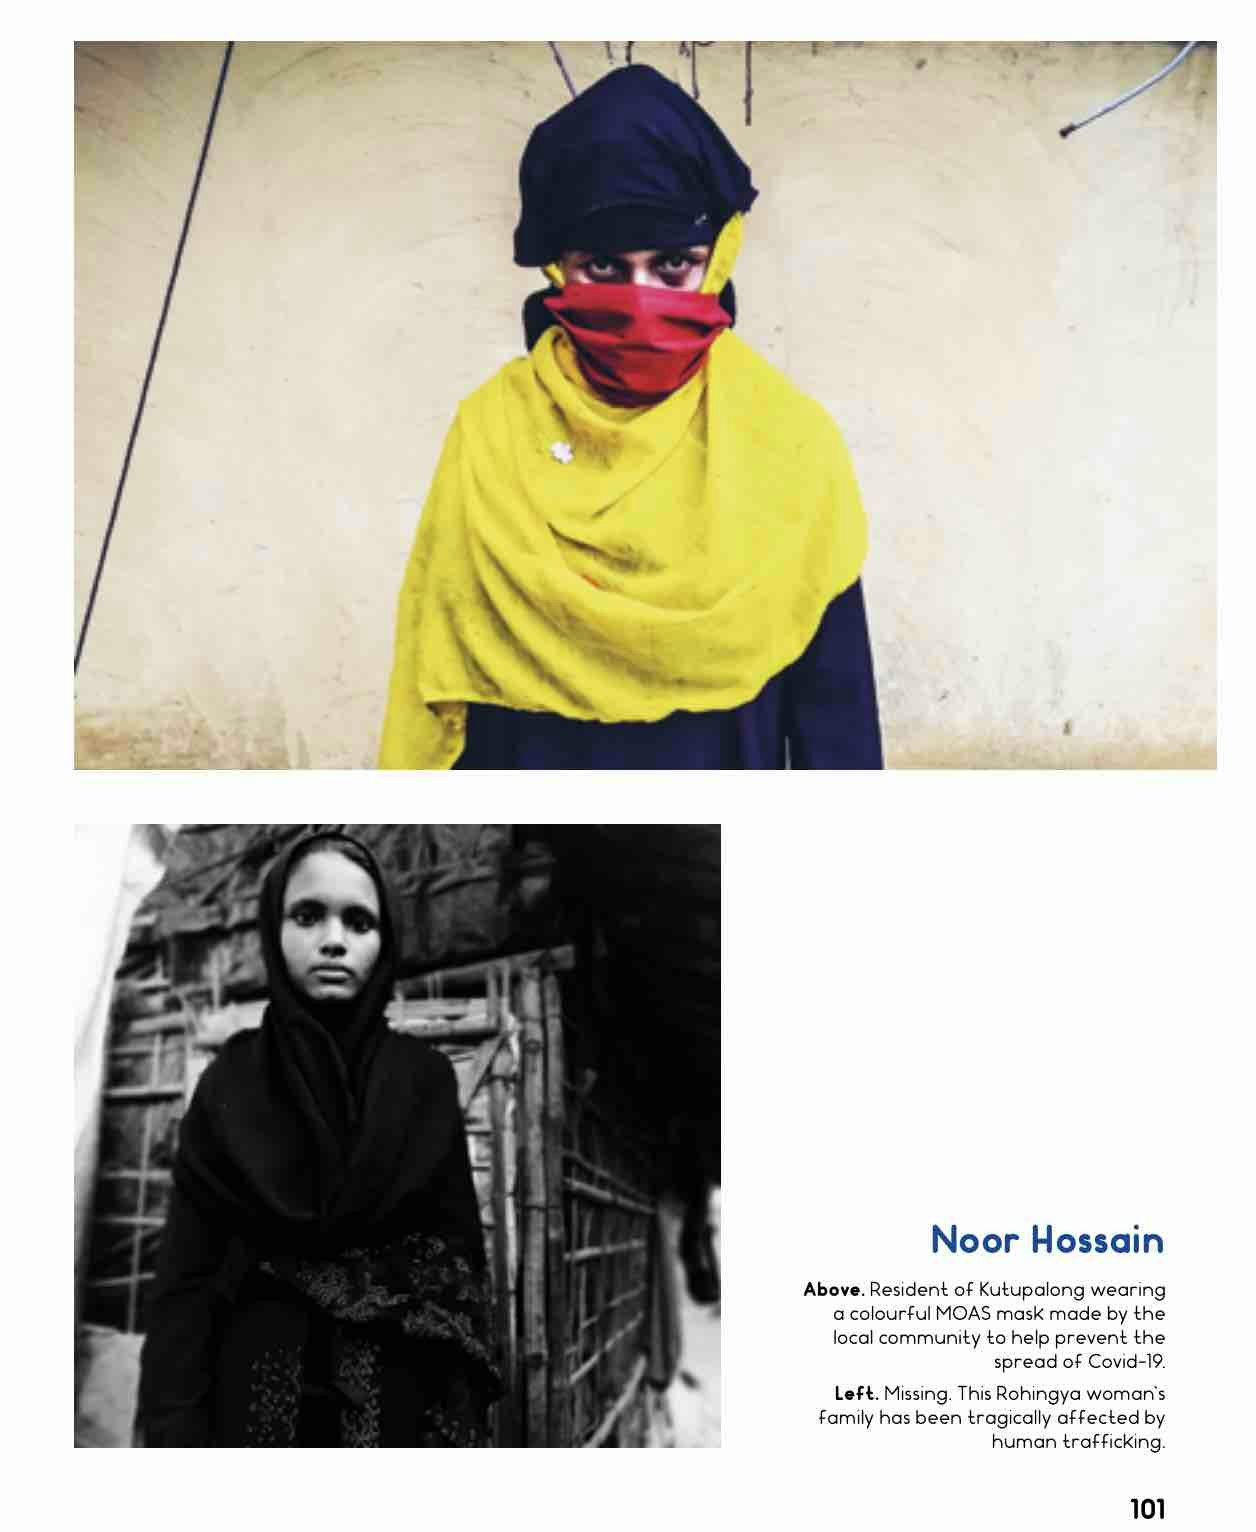 Page from the "Conflict" issue of Weapons of Reason (November 2020). Images by Noor Hossain.